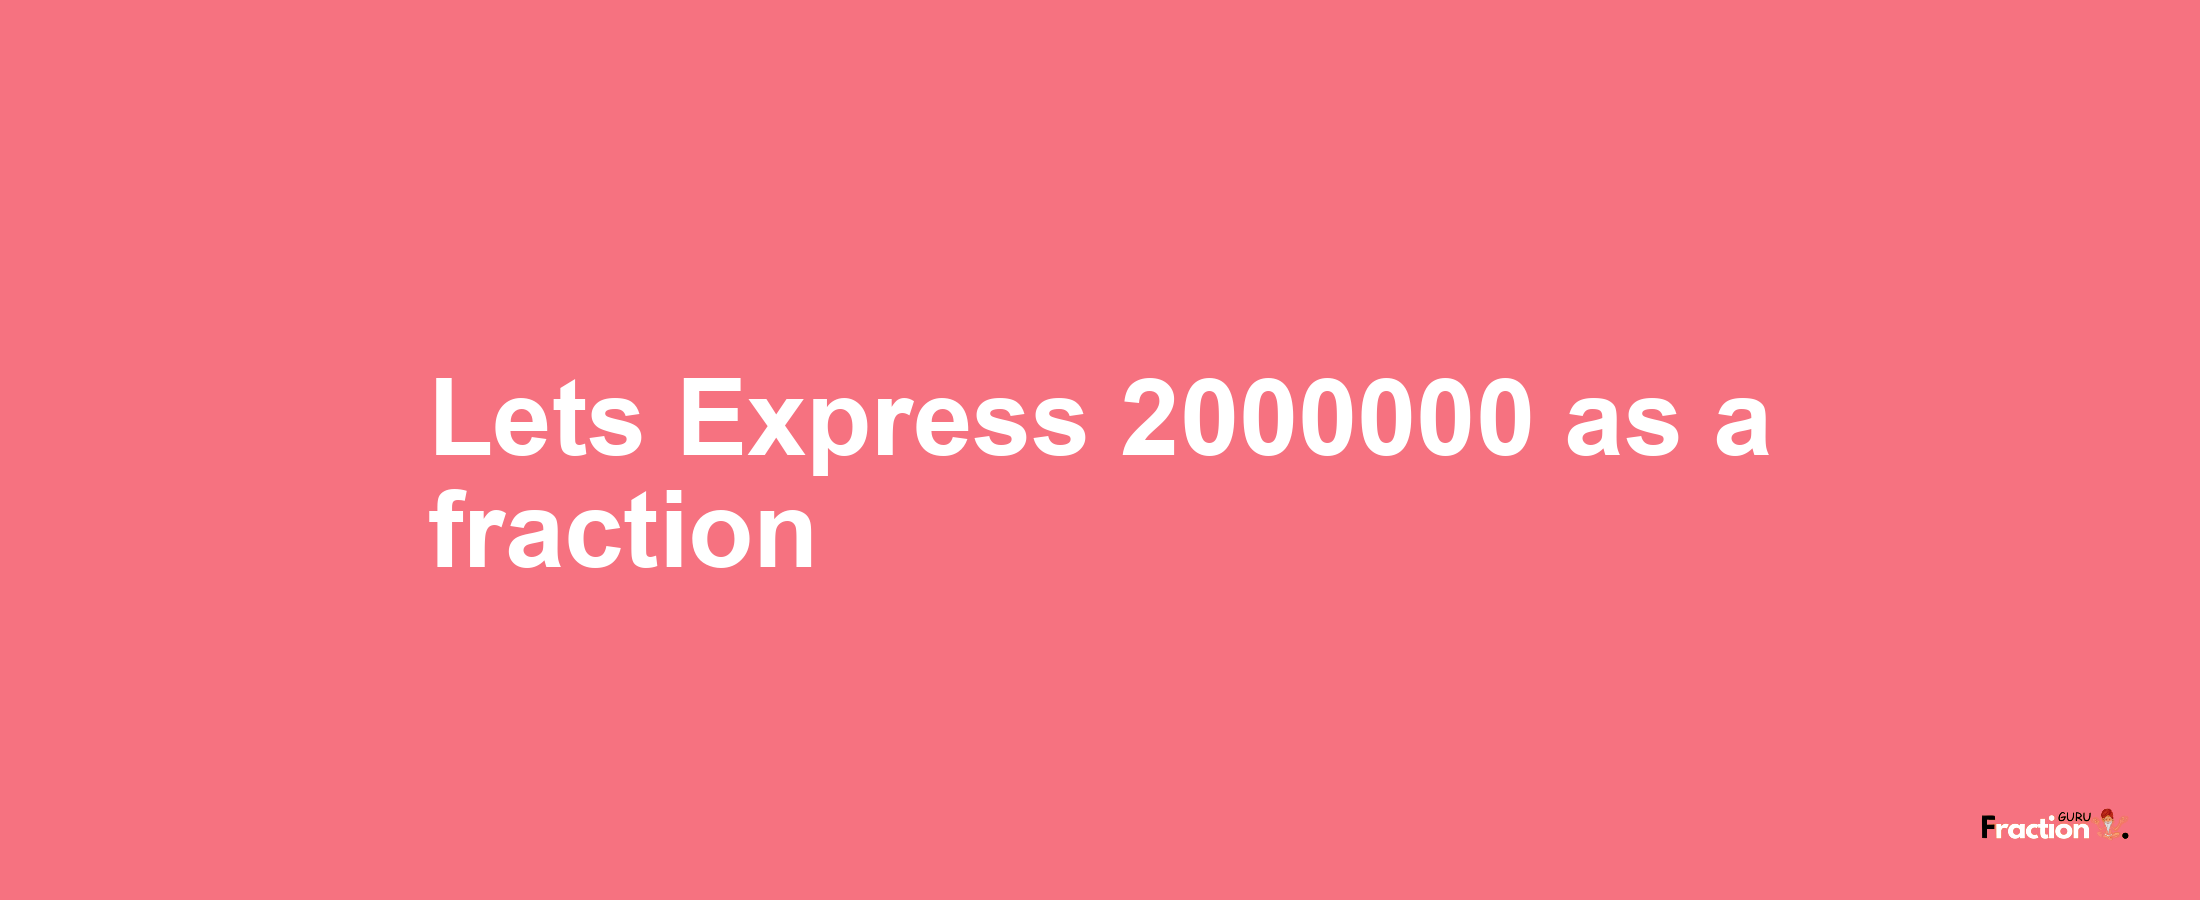 Lets Express 2000000 as afraction